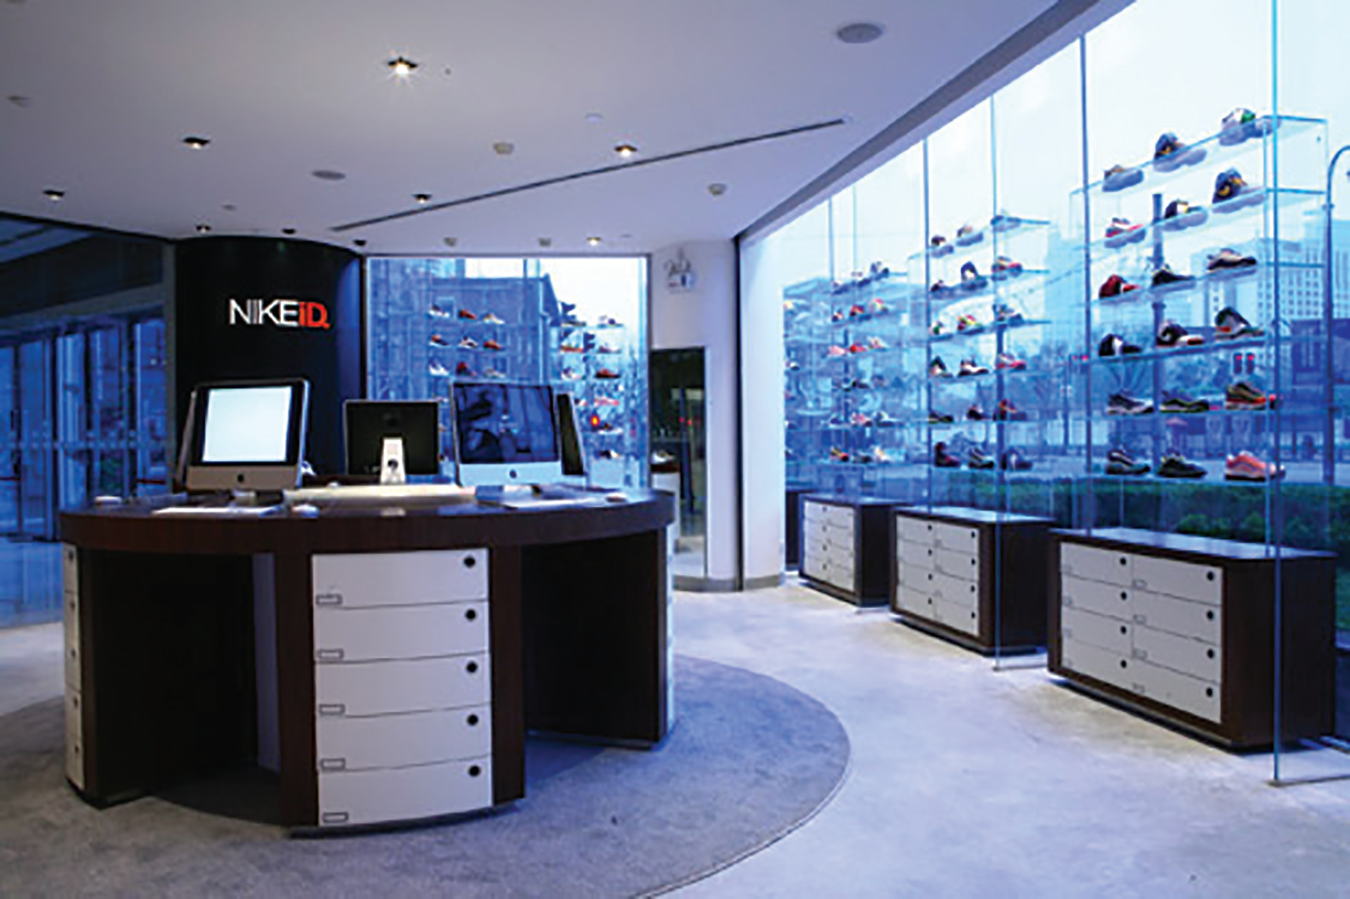 A picture of the inside of a NIKEiD store showing shoes on shelves by glass windows with a view of many tall buildings.